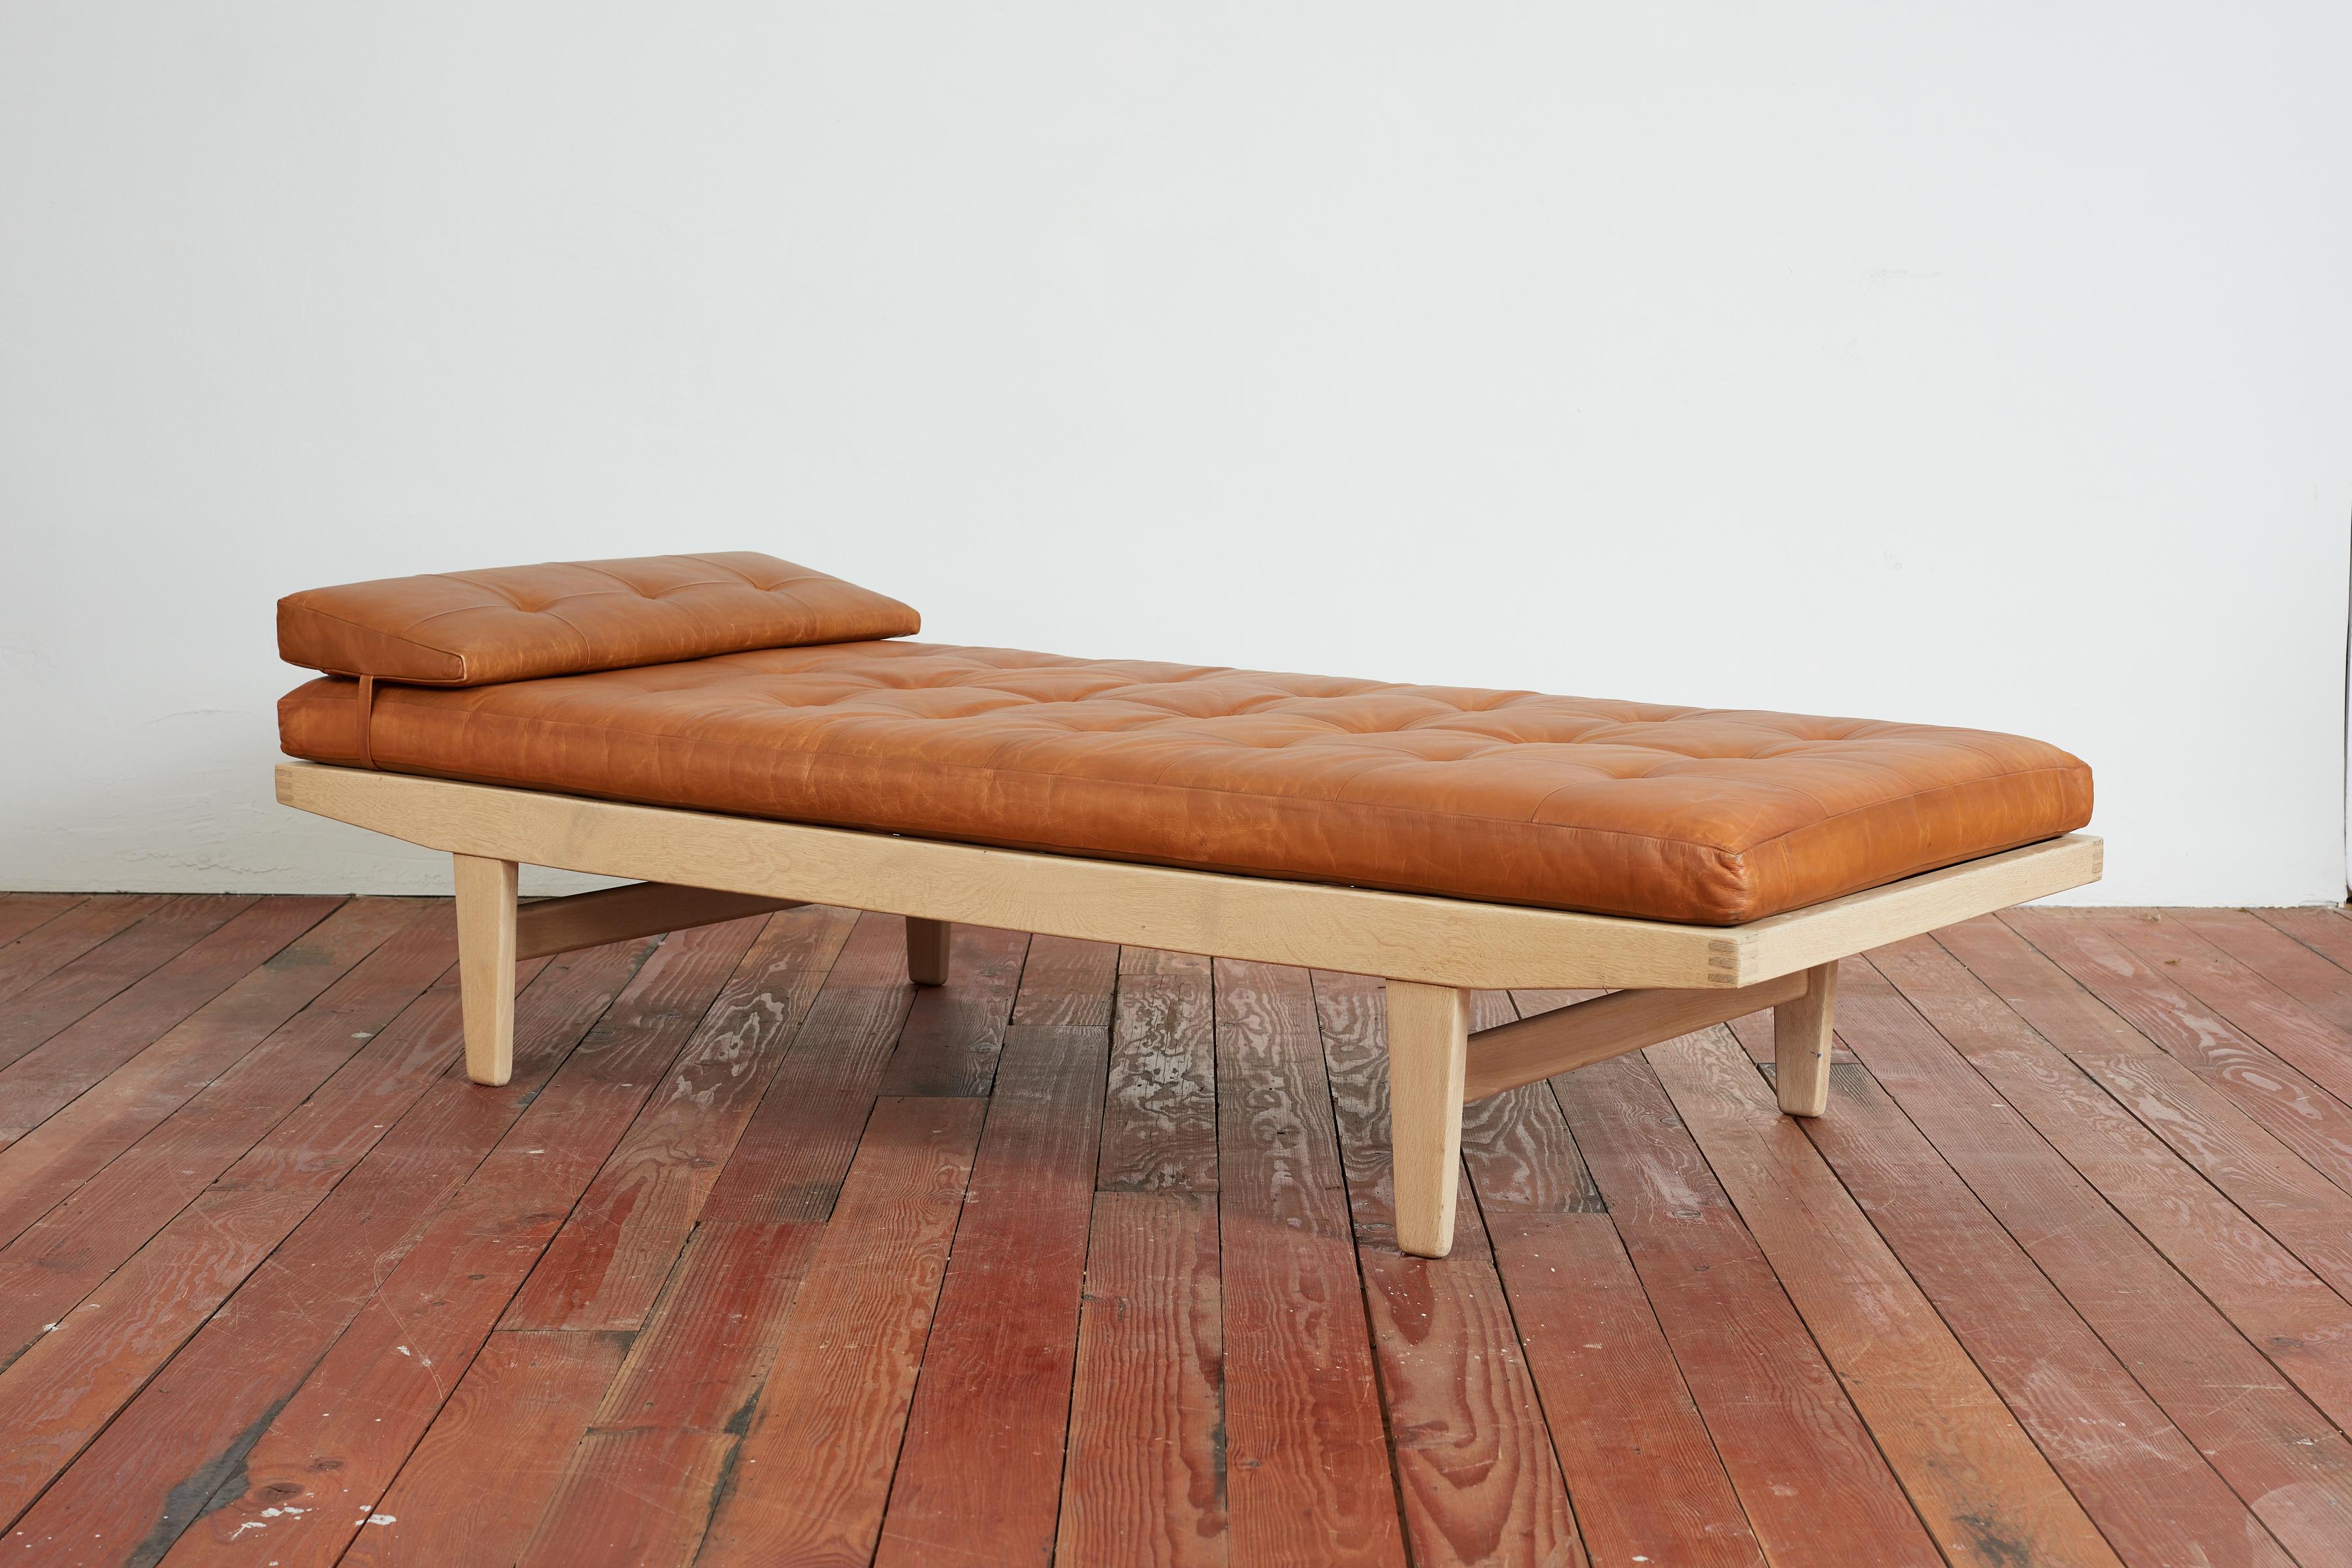 Wonderful daybed by Poul Volther in beautifully aged saddle leather with tufted cushion and wedged pillow. 

Simple slatted oakwood frame.

Circa 1950s.